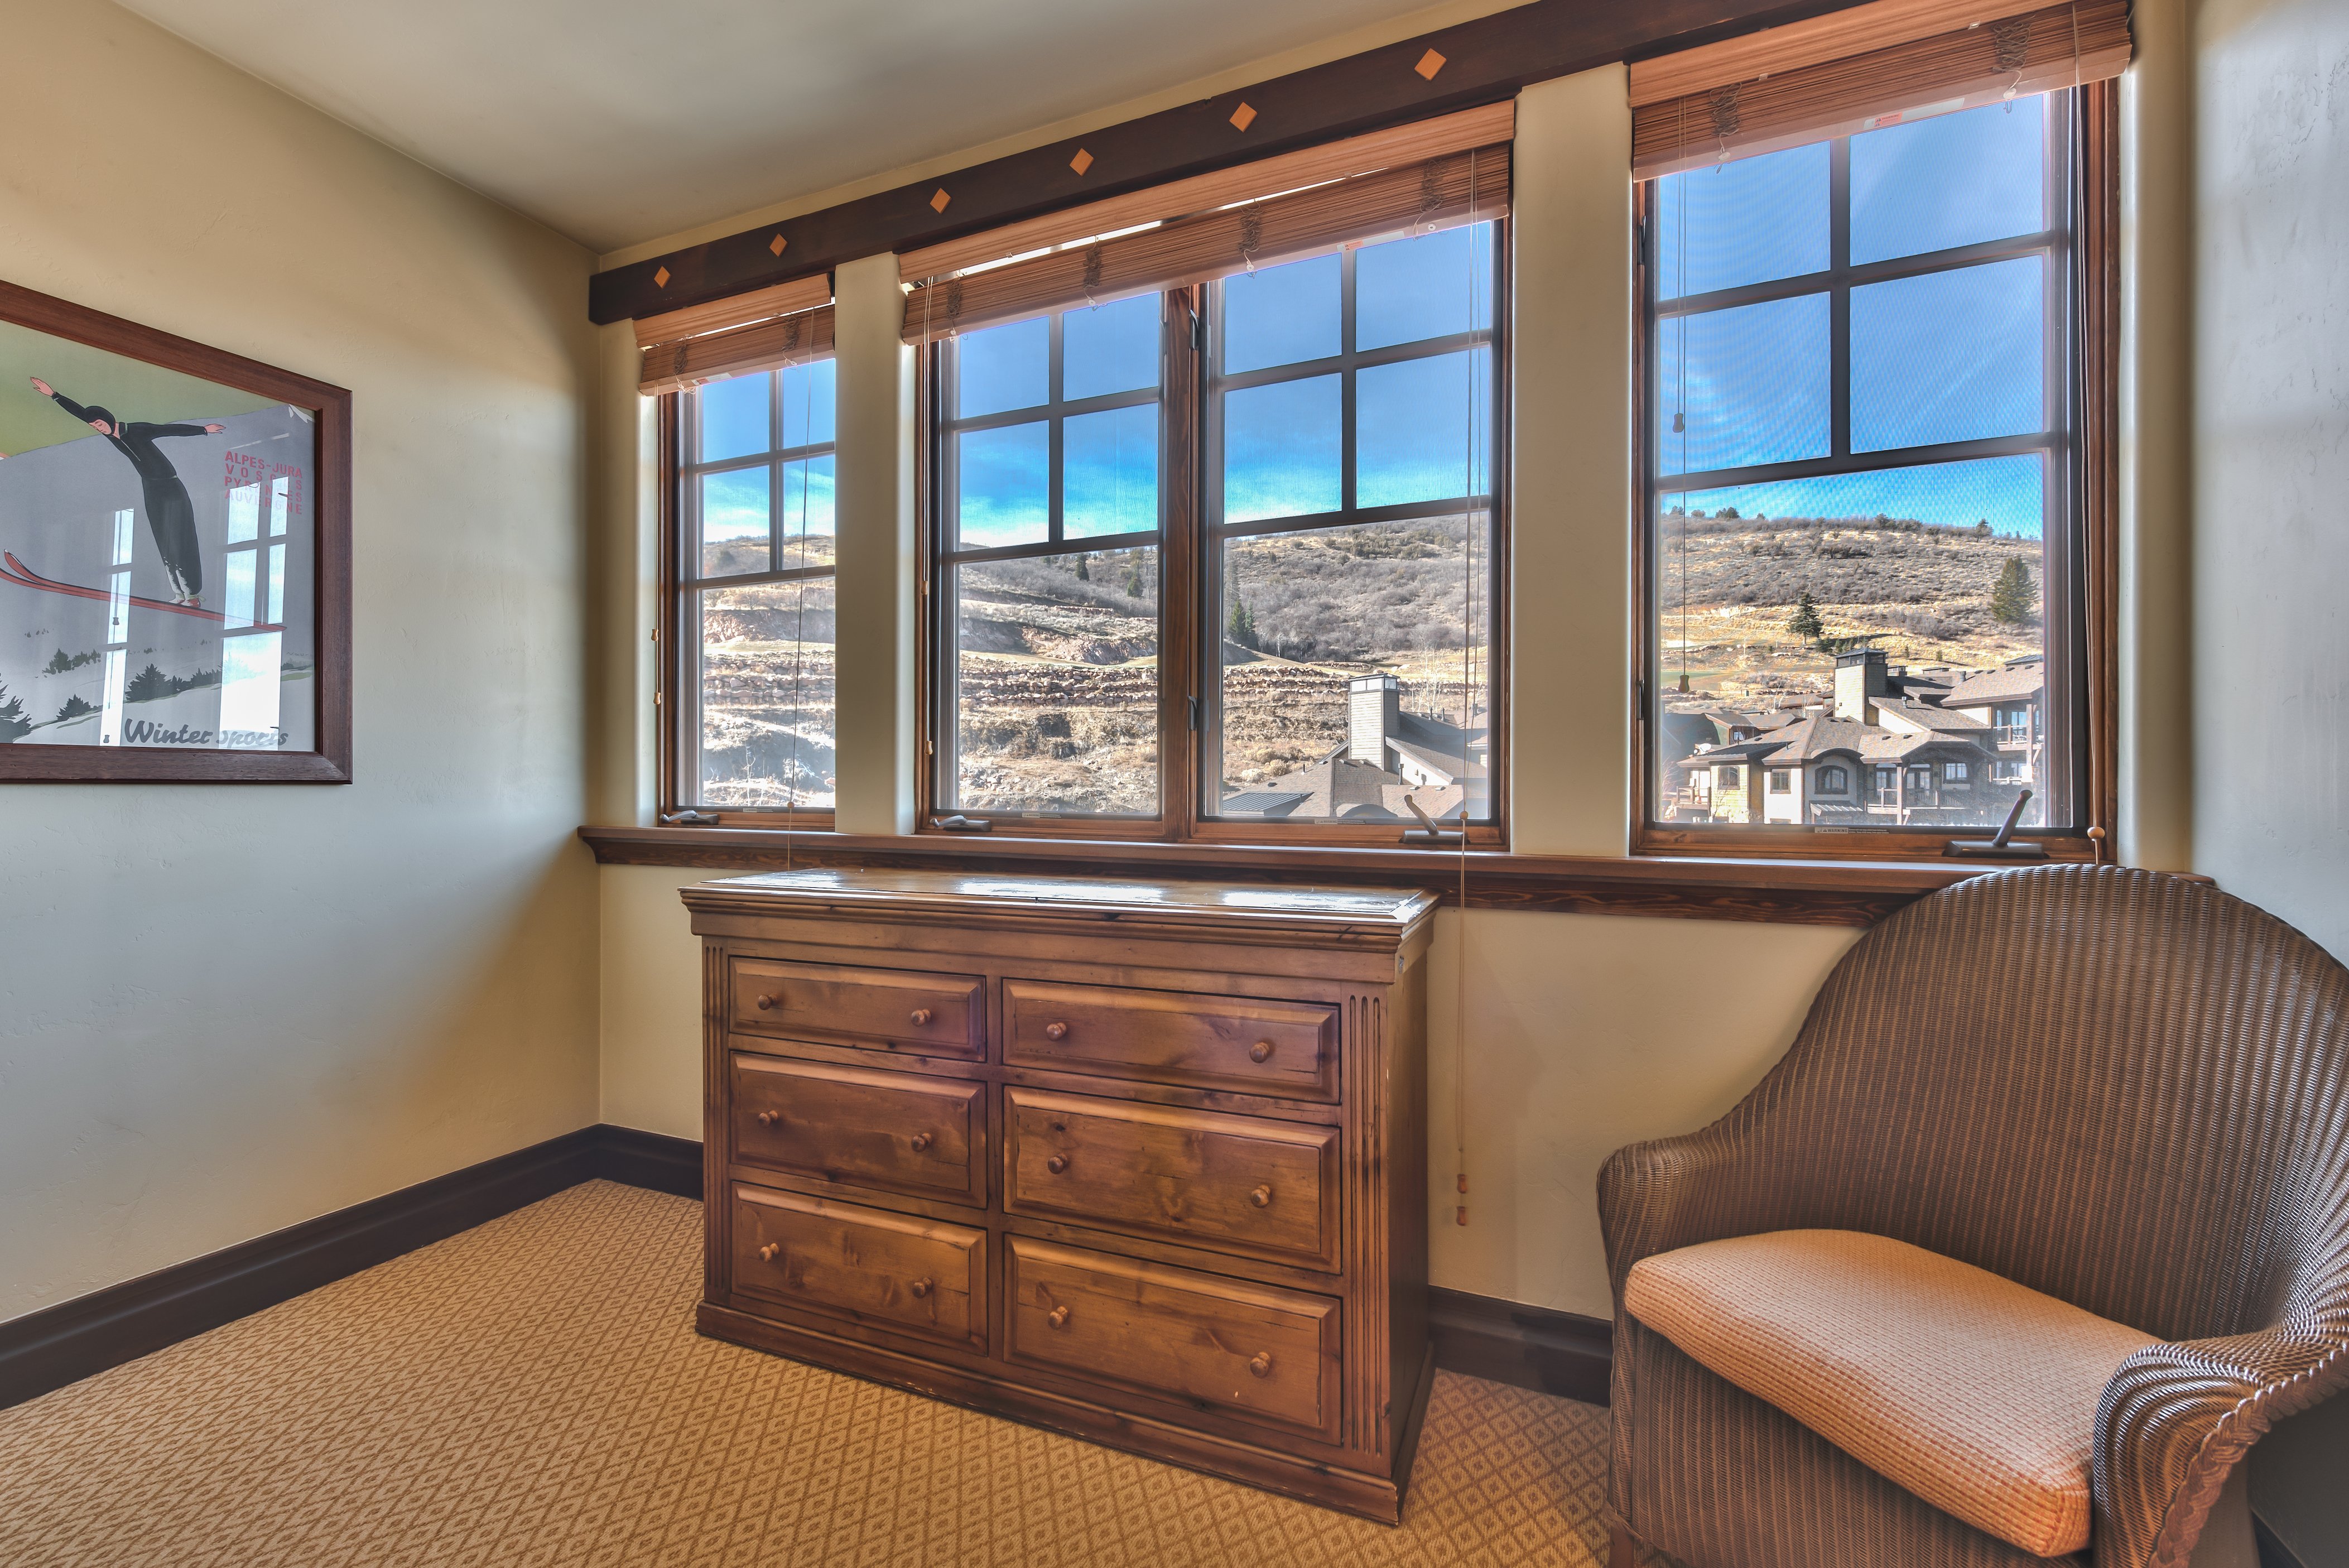 Dresser, chair and view